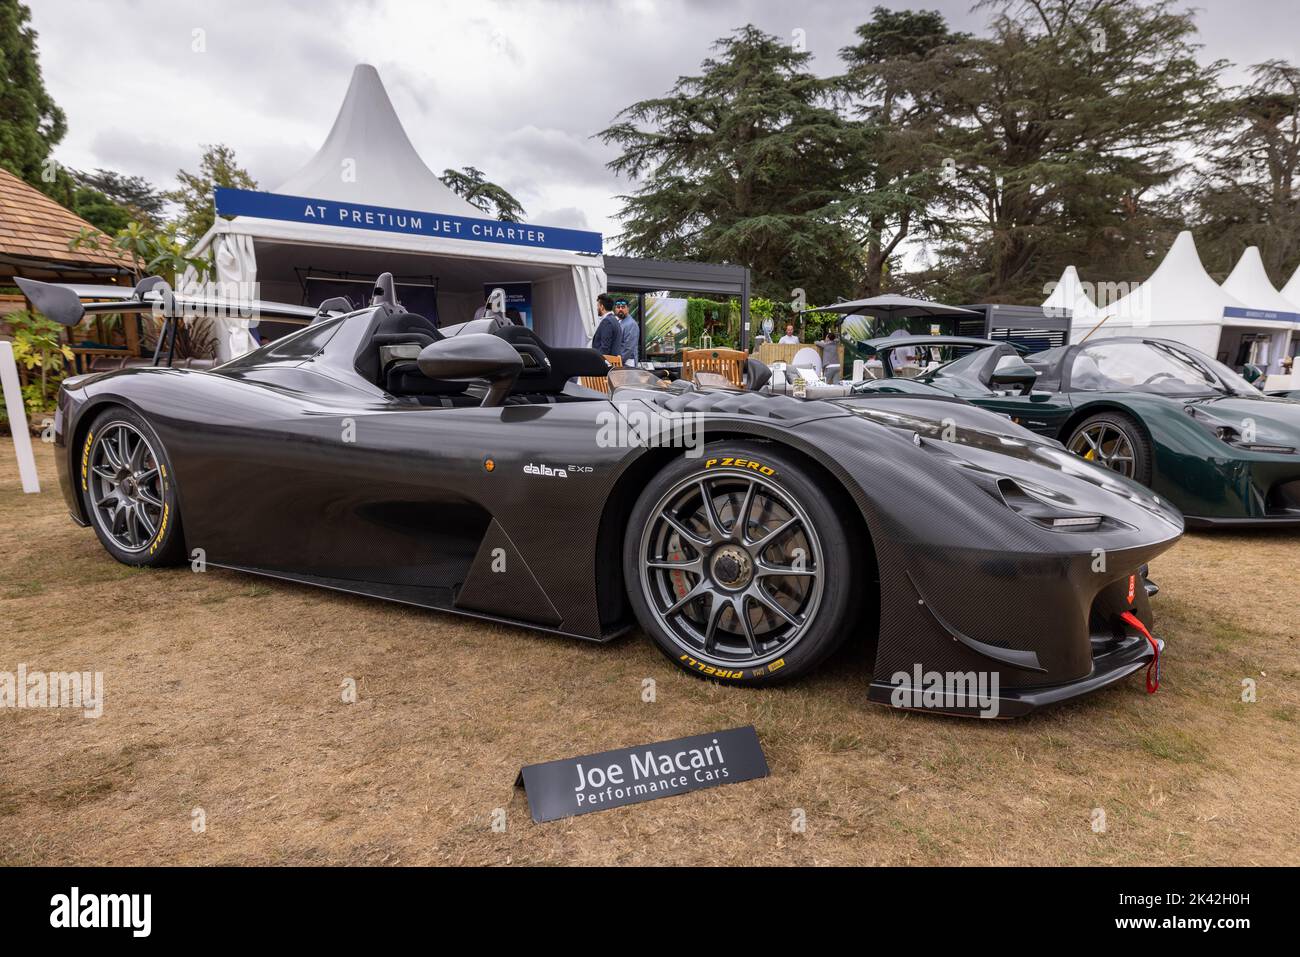 Dallara Stradale Italian sports car on display at the Salon Privé Concours d’Elégance motor show held at Blenheim Palace Stock Photo